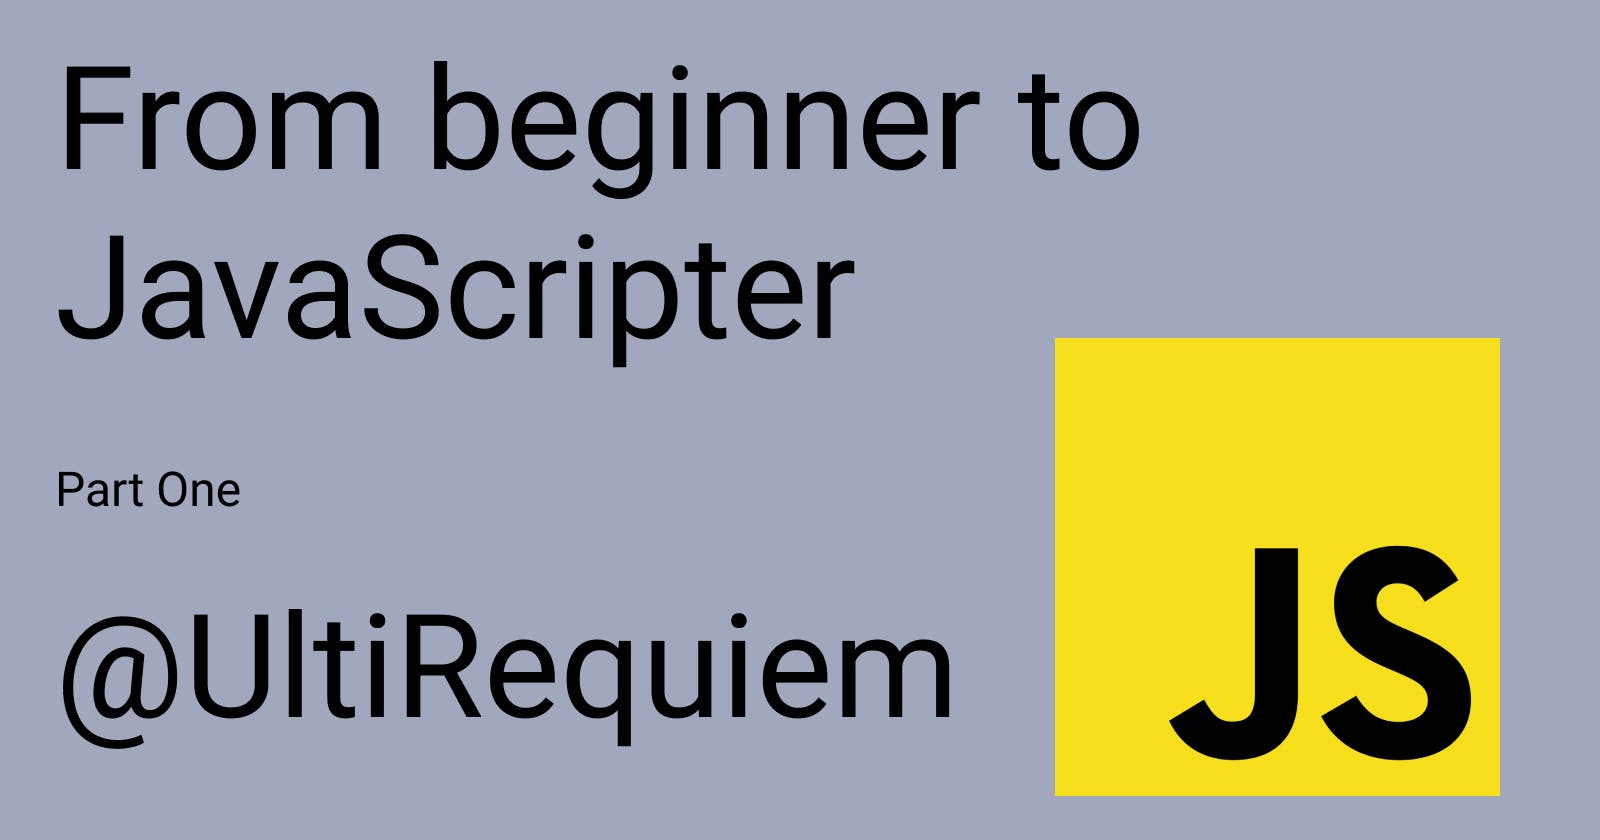 From beginner to JavaScripter, Part One